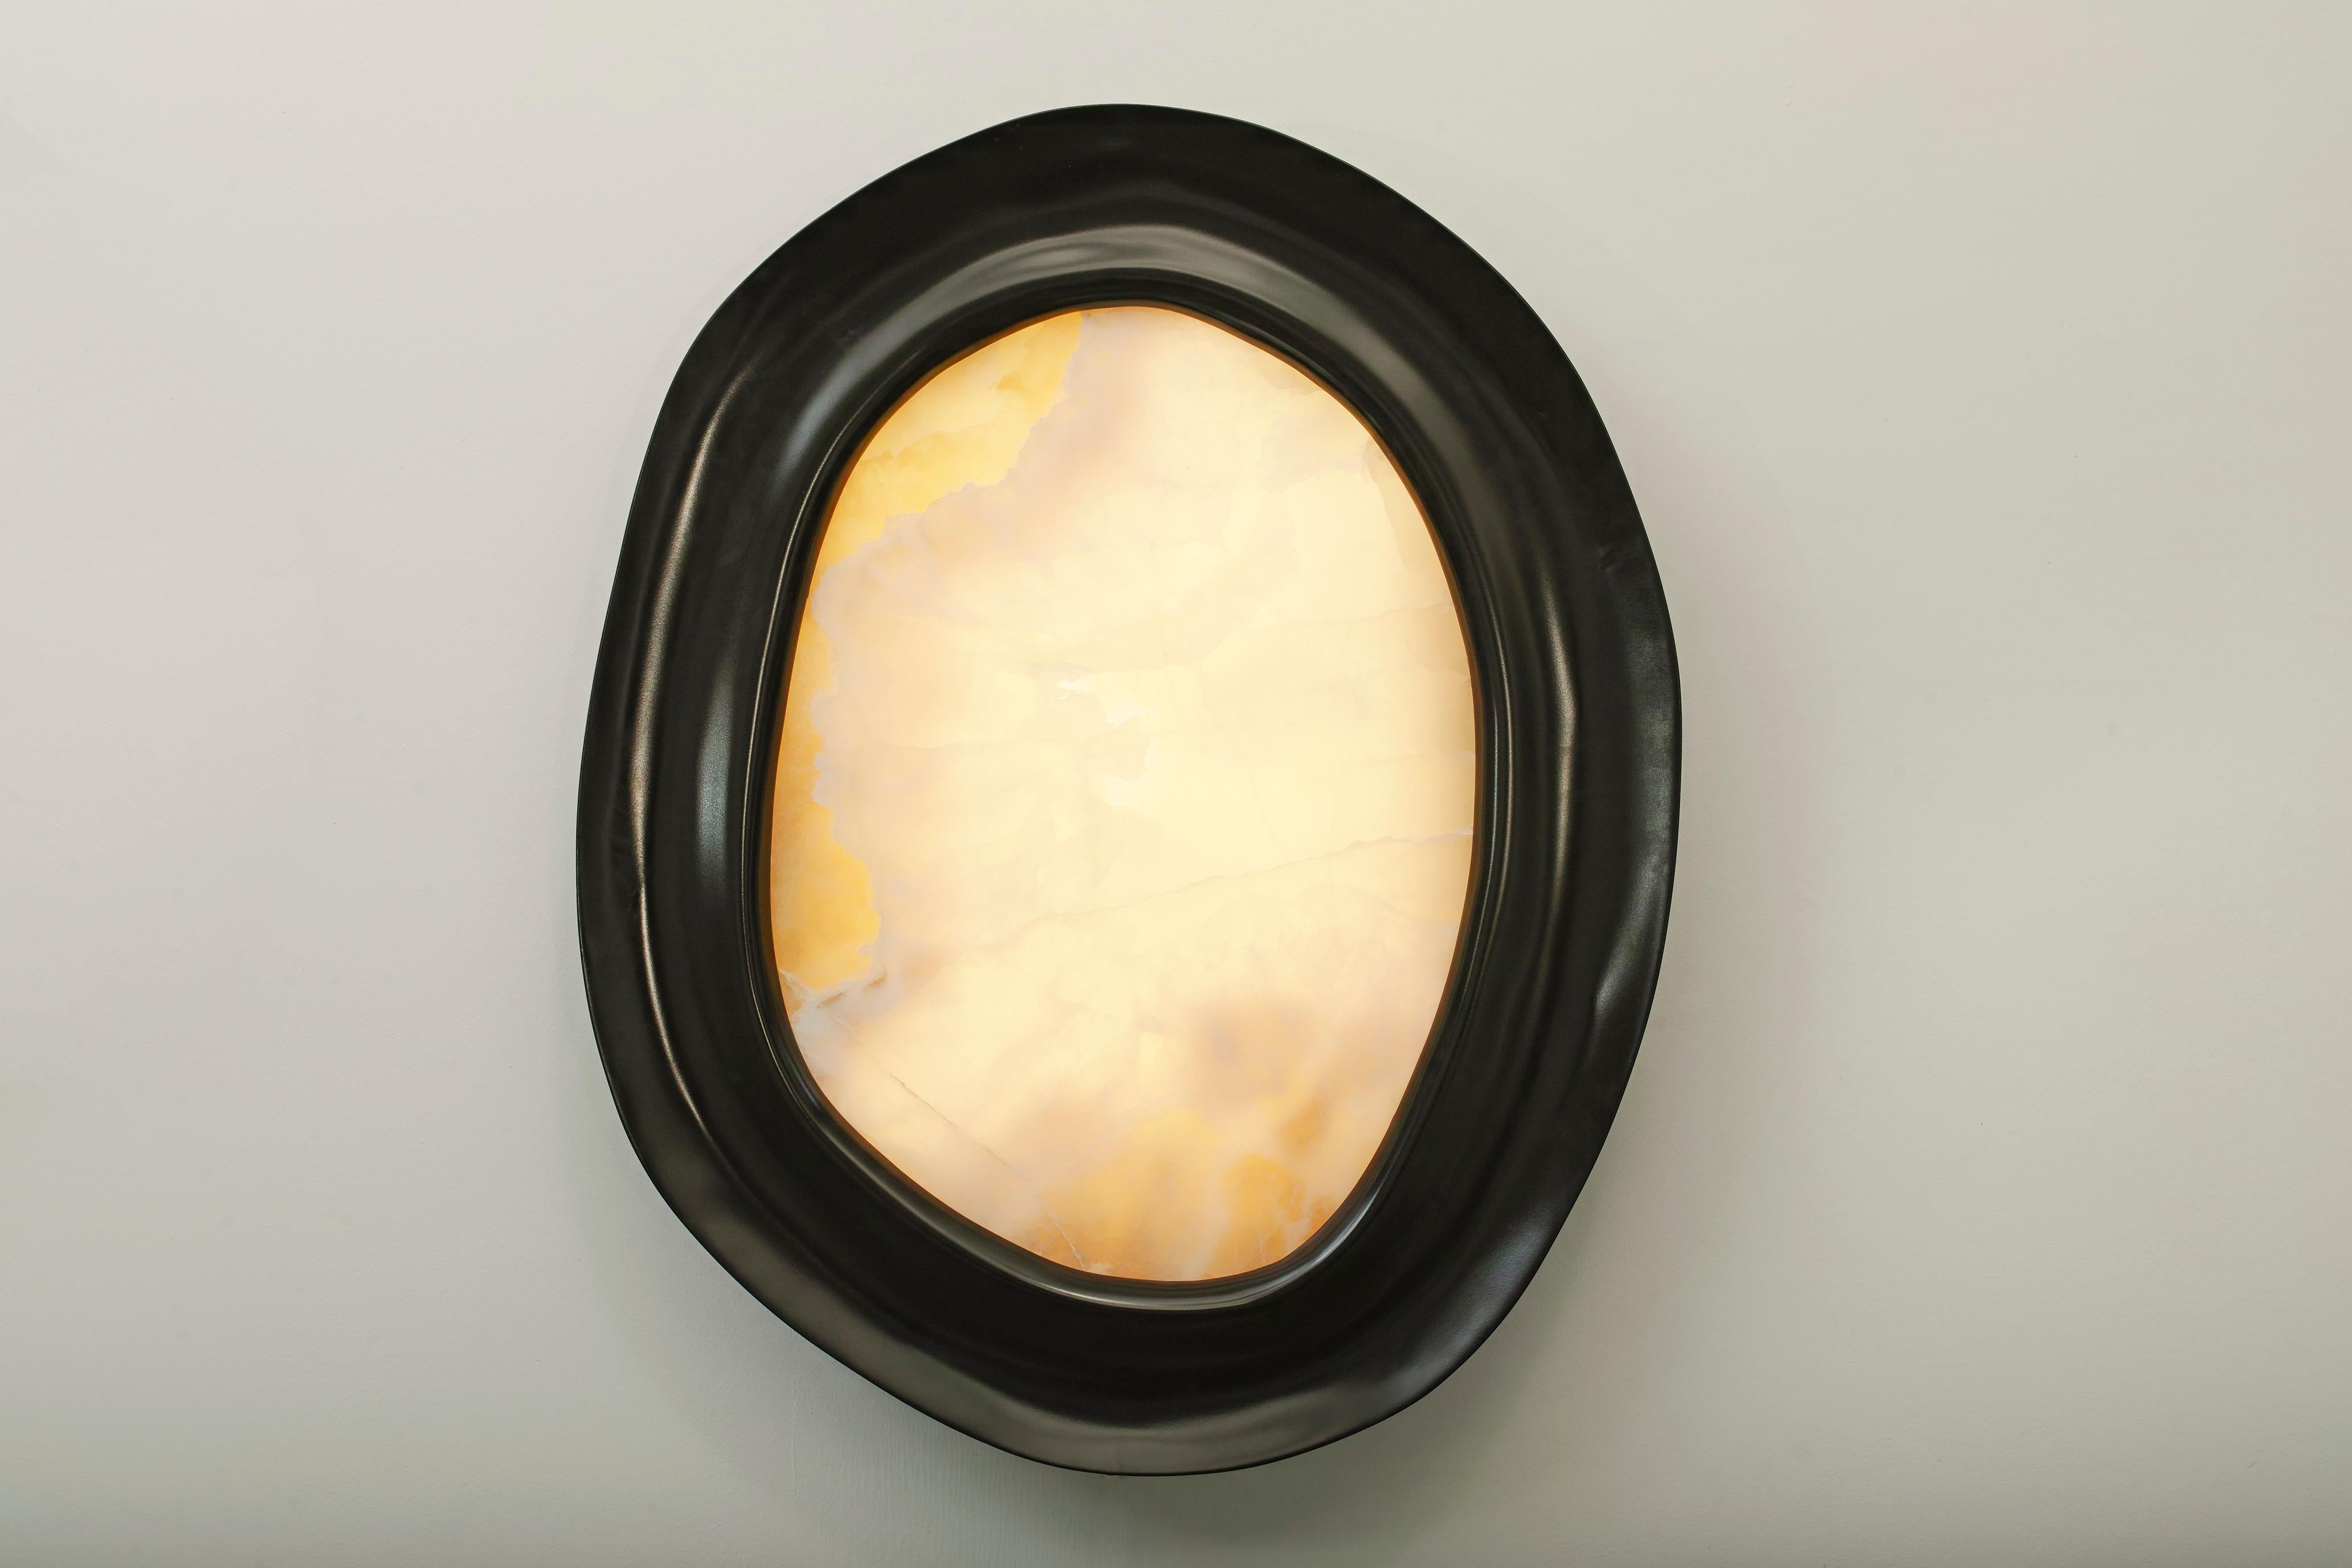 Kumo wall light by Thomas Trad 
2019
Dimensions: Varies between 70 and 80 cm in diameter
 10 cm in depth
Materials: Wood, pink onyx, LED light

Hand carved wall light.

Thomas Trad is a product designer from Beirut. An alumnus of London's